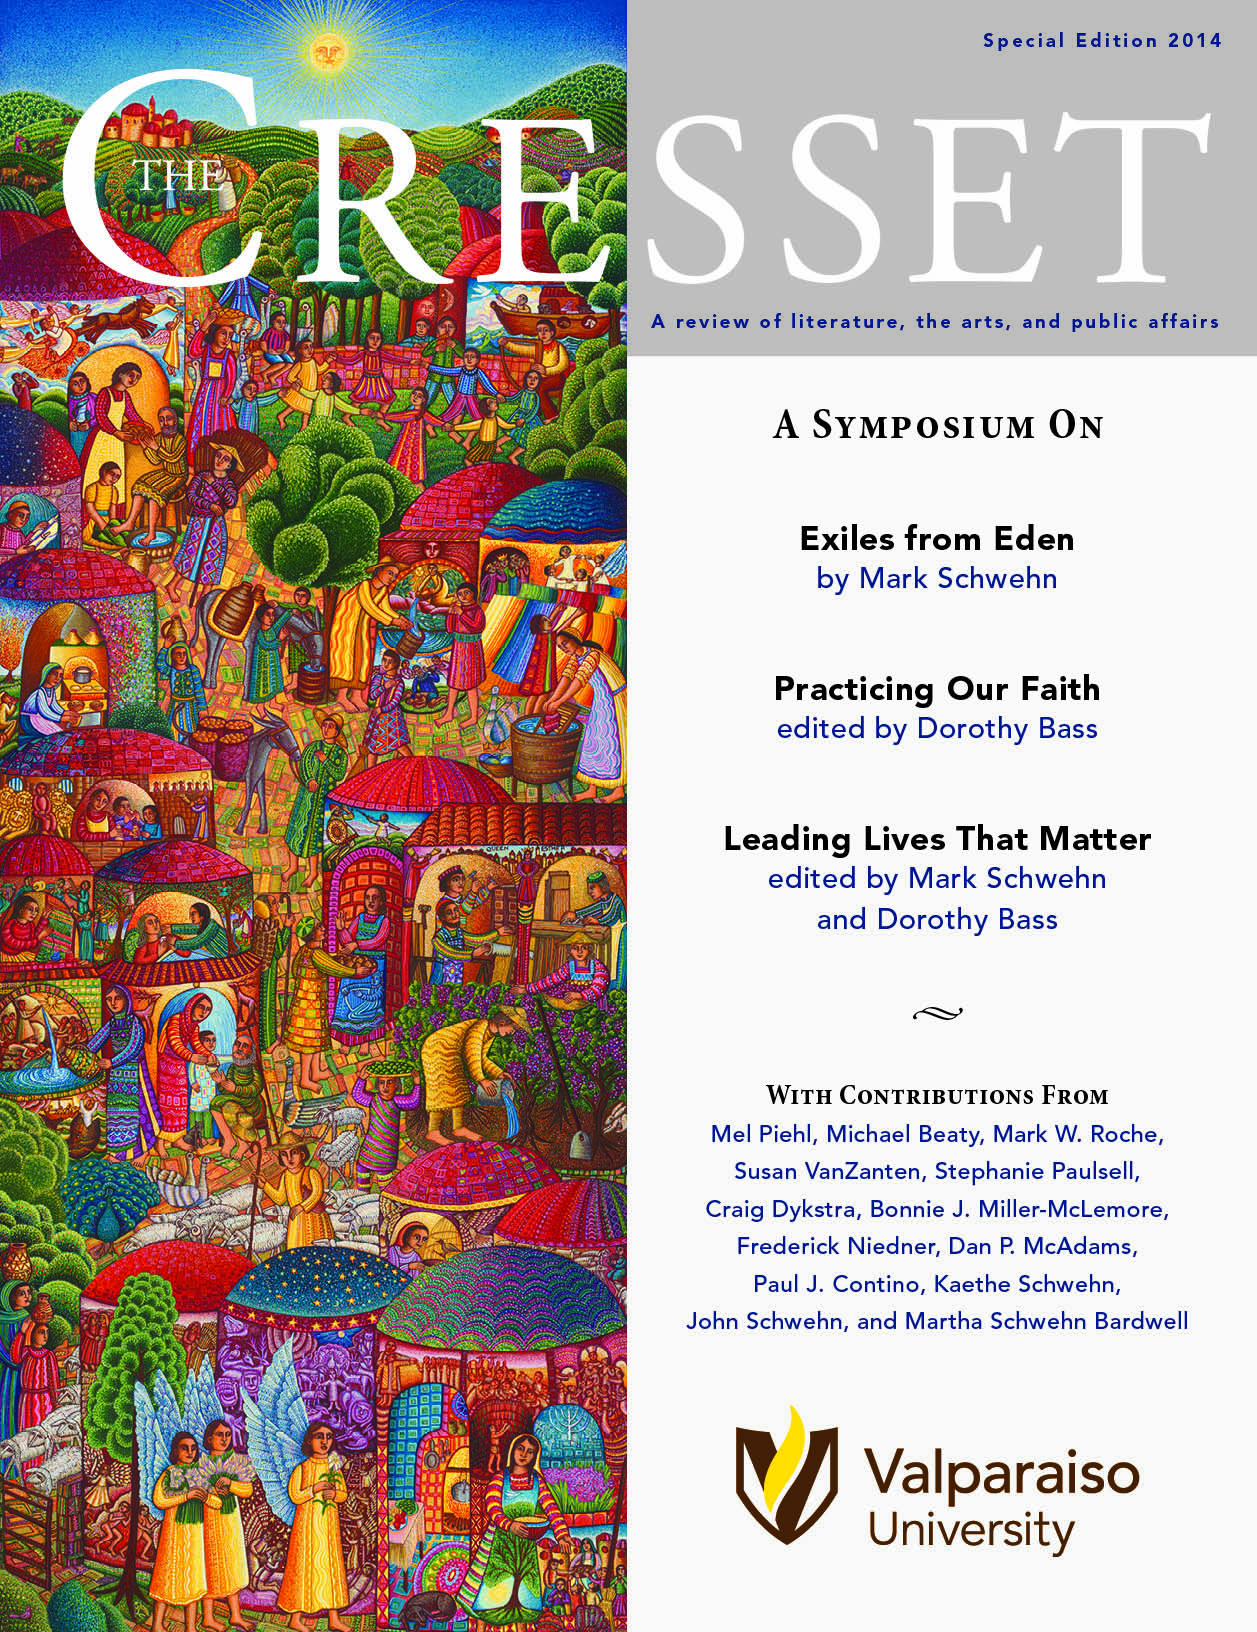 Special Issue 2014